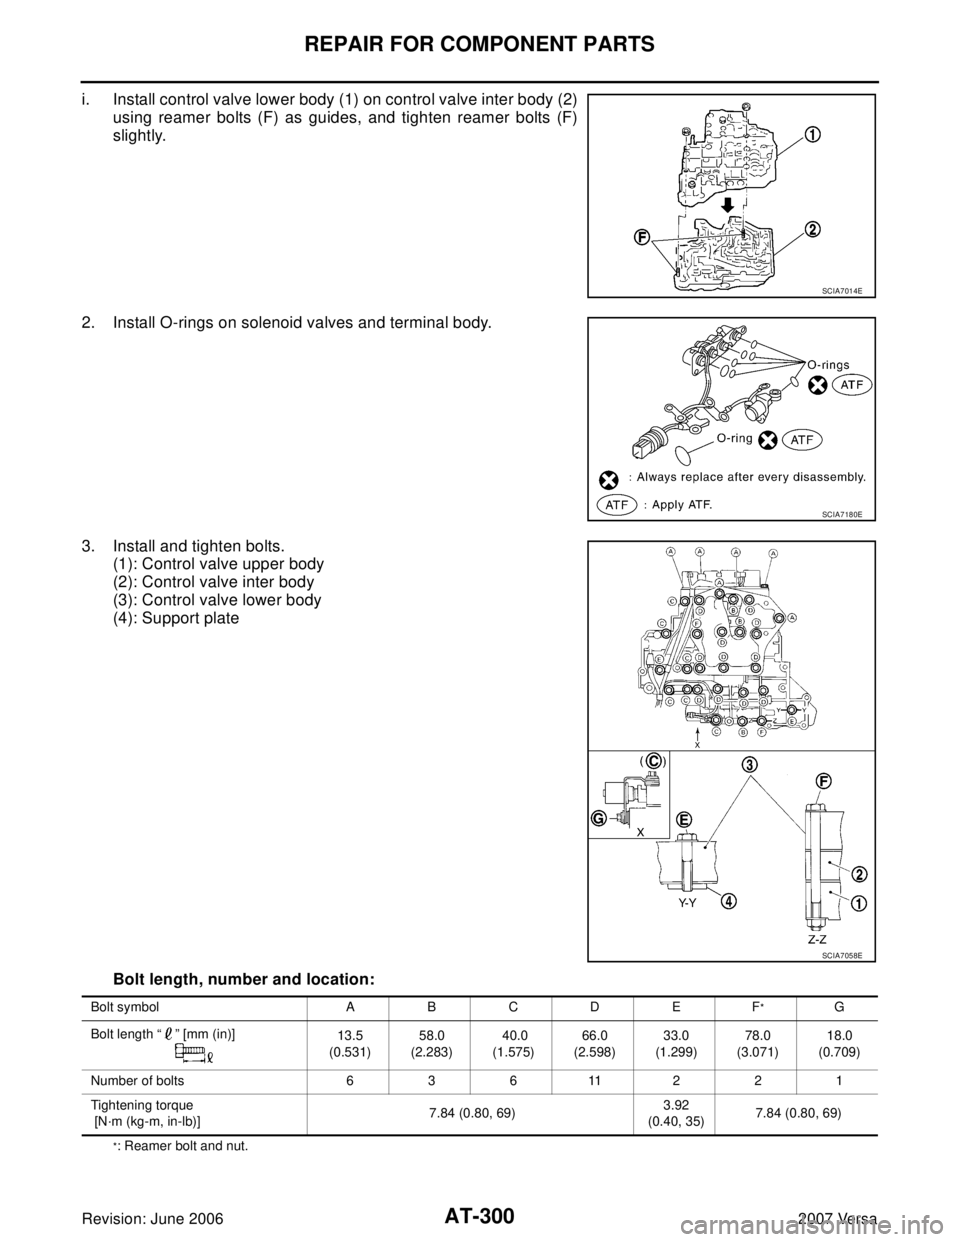 NISSAN TIIDA 2007  Service Repair Manual AT-300
REPAIR FOR COMPONENT PARTS
Revision: June 20062007 Versa
i. Install control valve lower body (1) on control valve inter body (2)
using reamer bolts (F) as guides, and tighten reamer bolts (F)
s